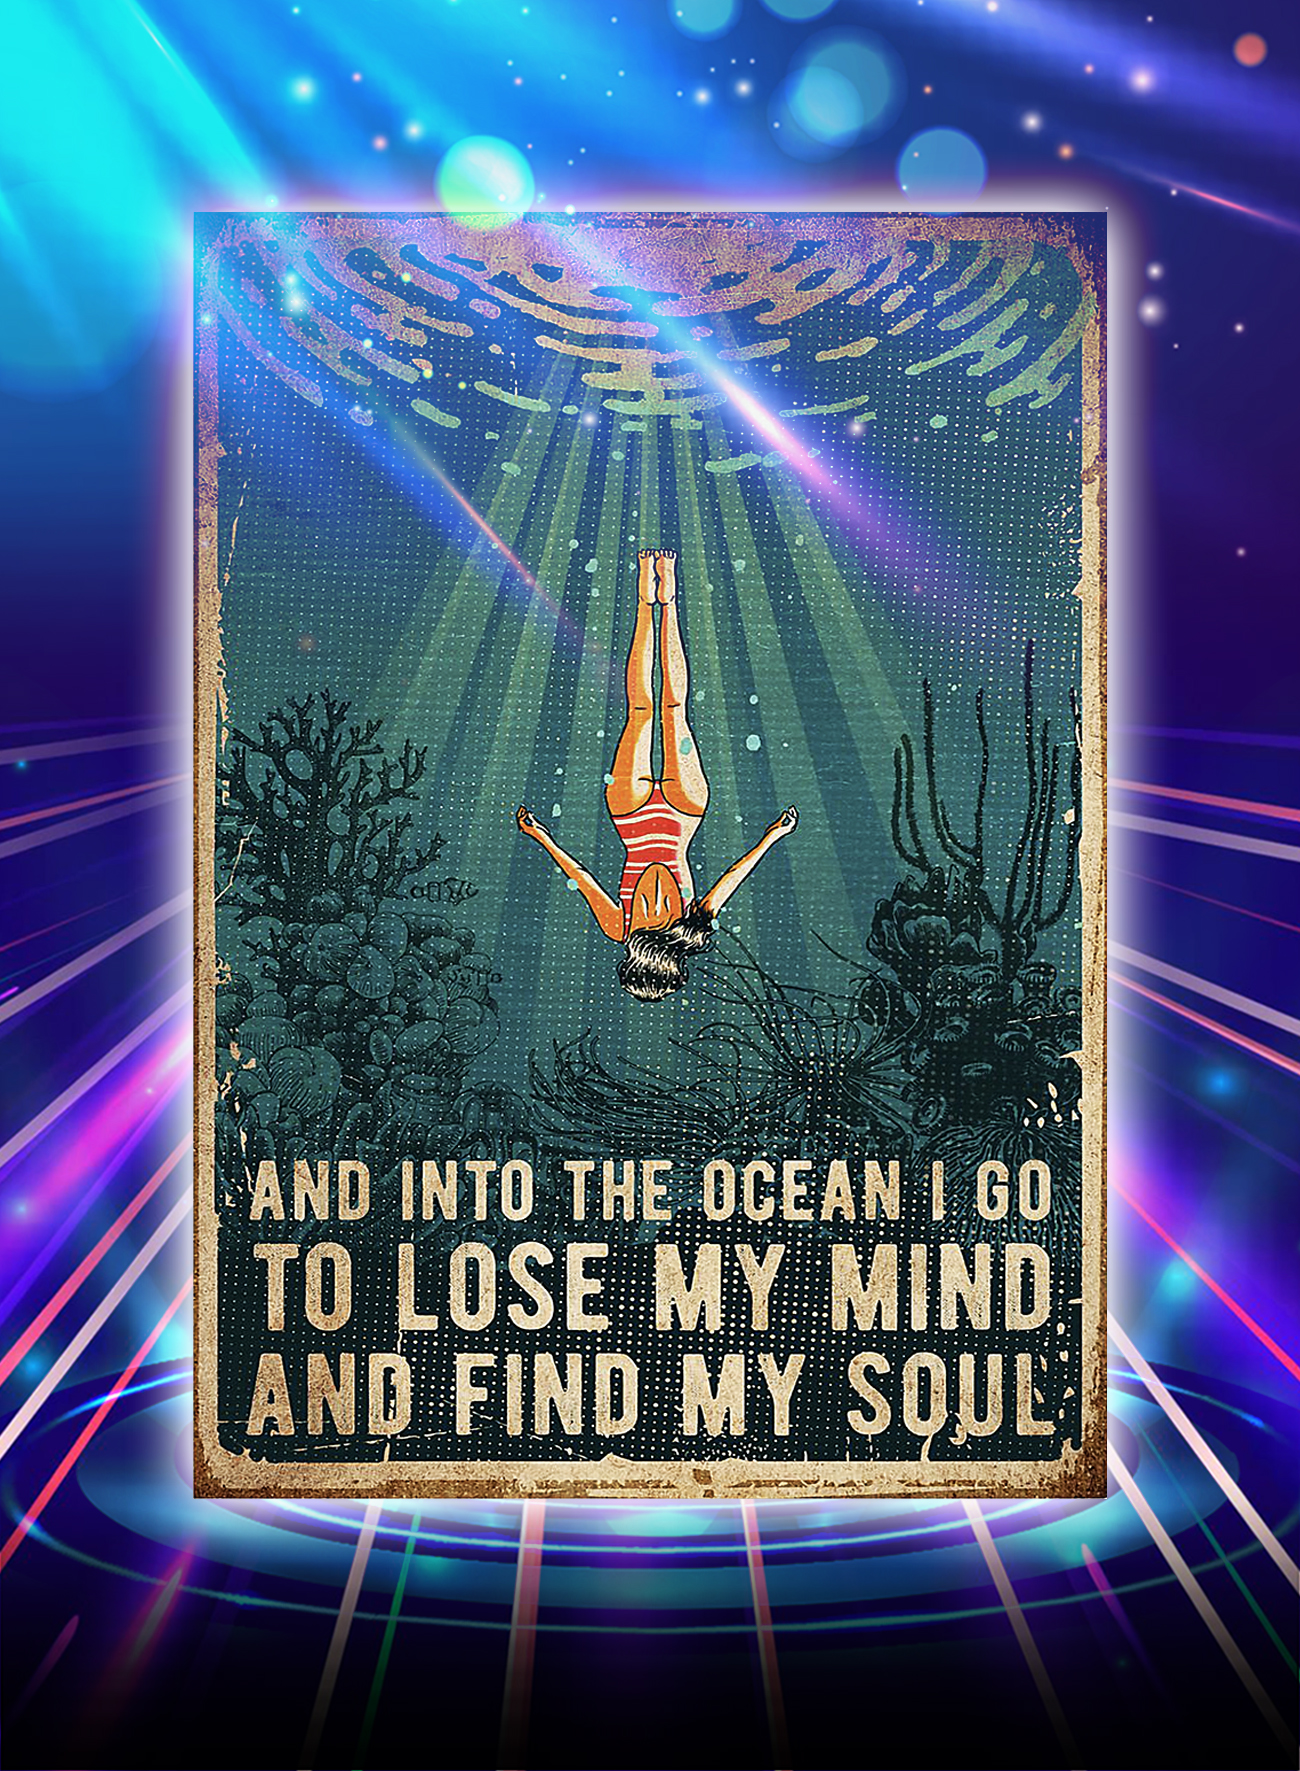 Swimming And into the ocean i go to lose my mind and find my soul poster - A4